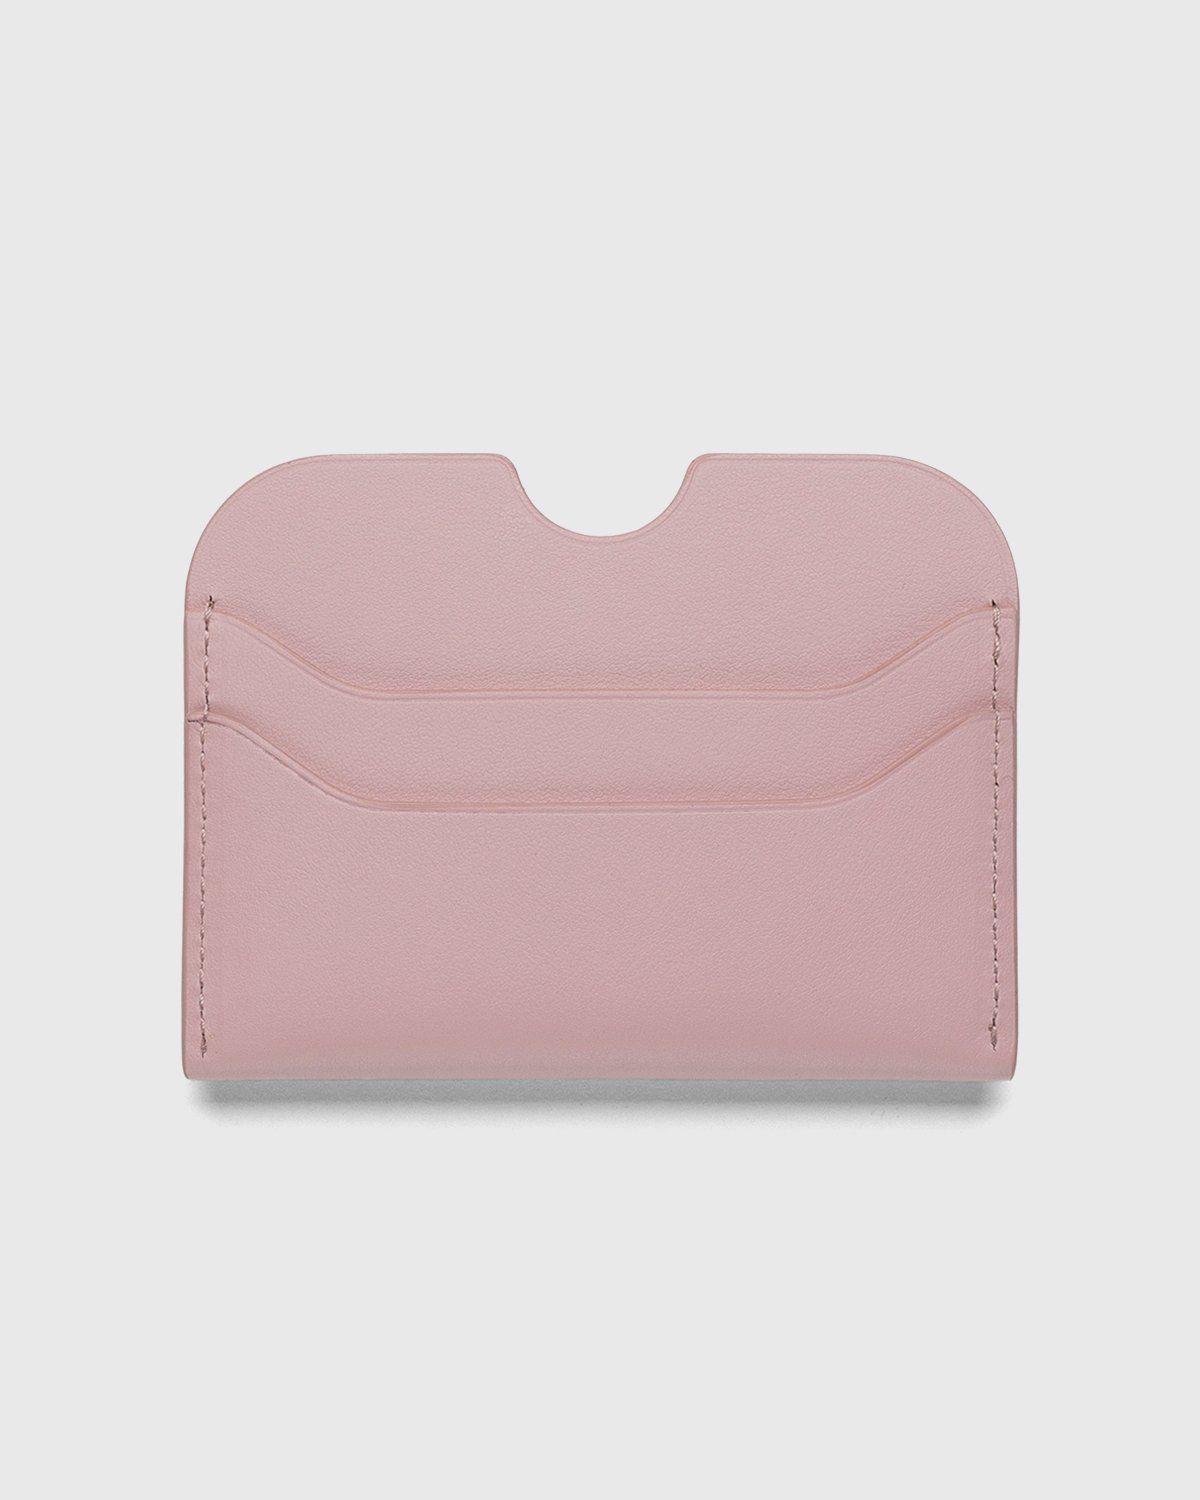 Acne Studios – Leather Card Case Powder Pink - Wallets - Pink - Image 2